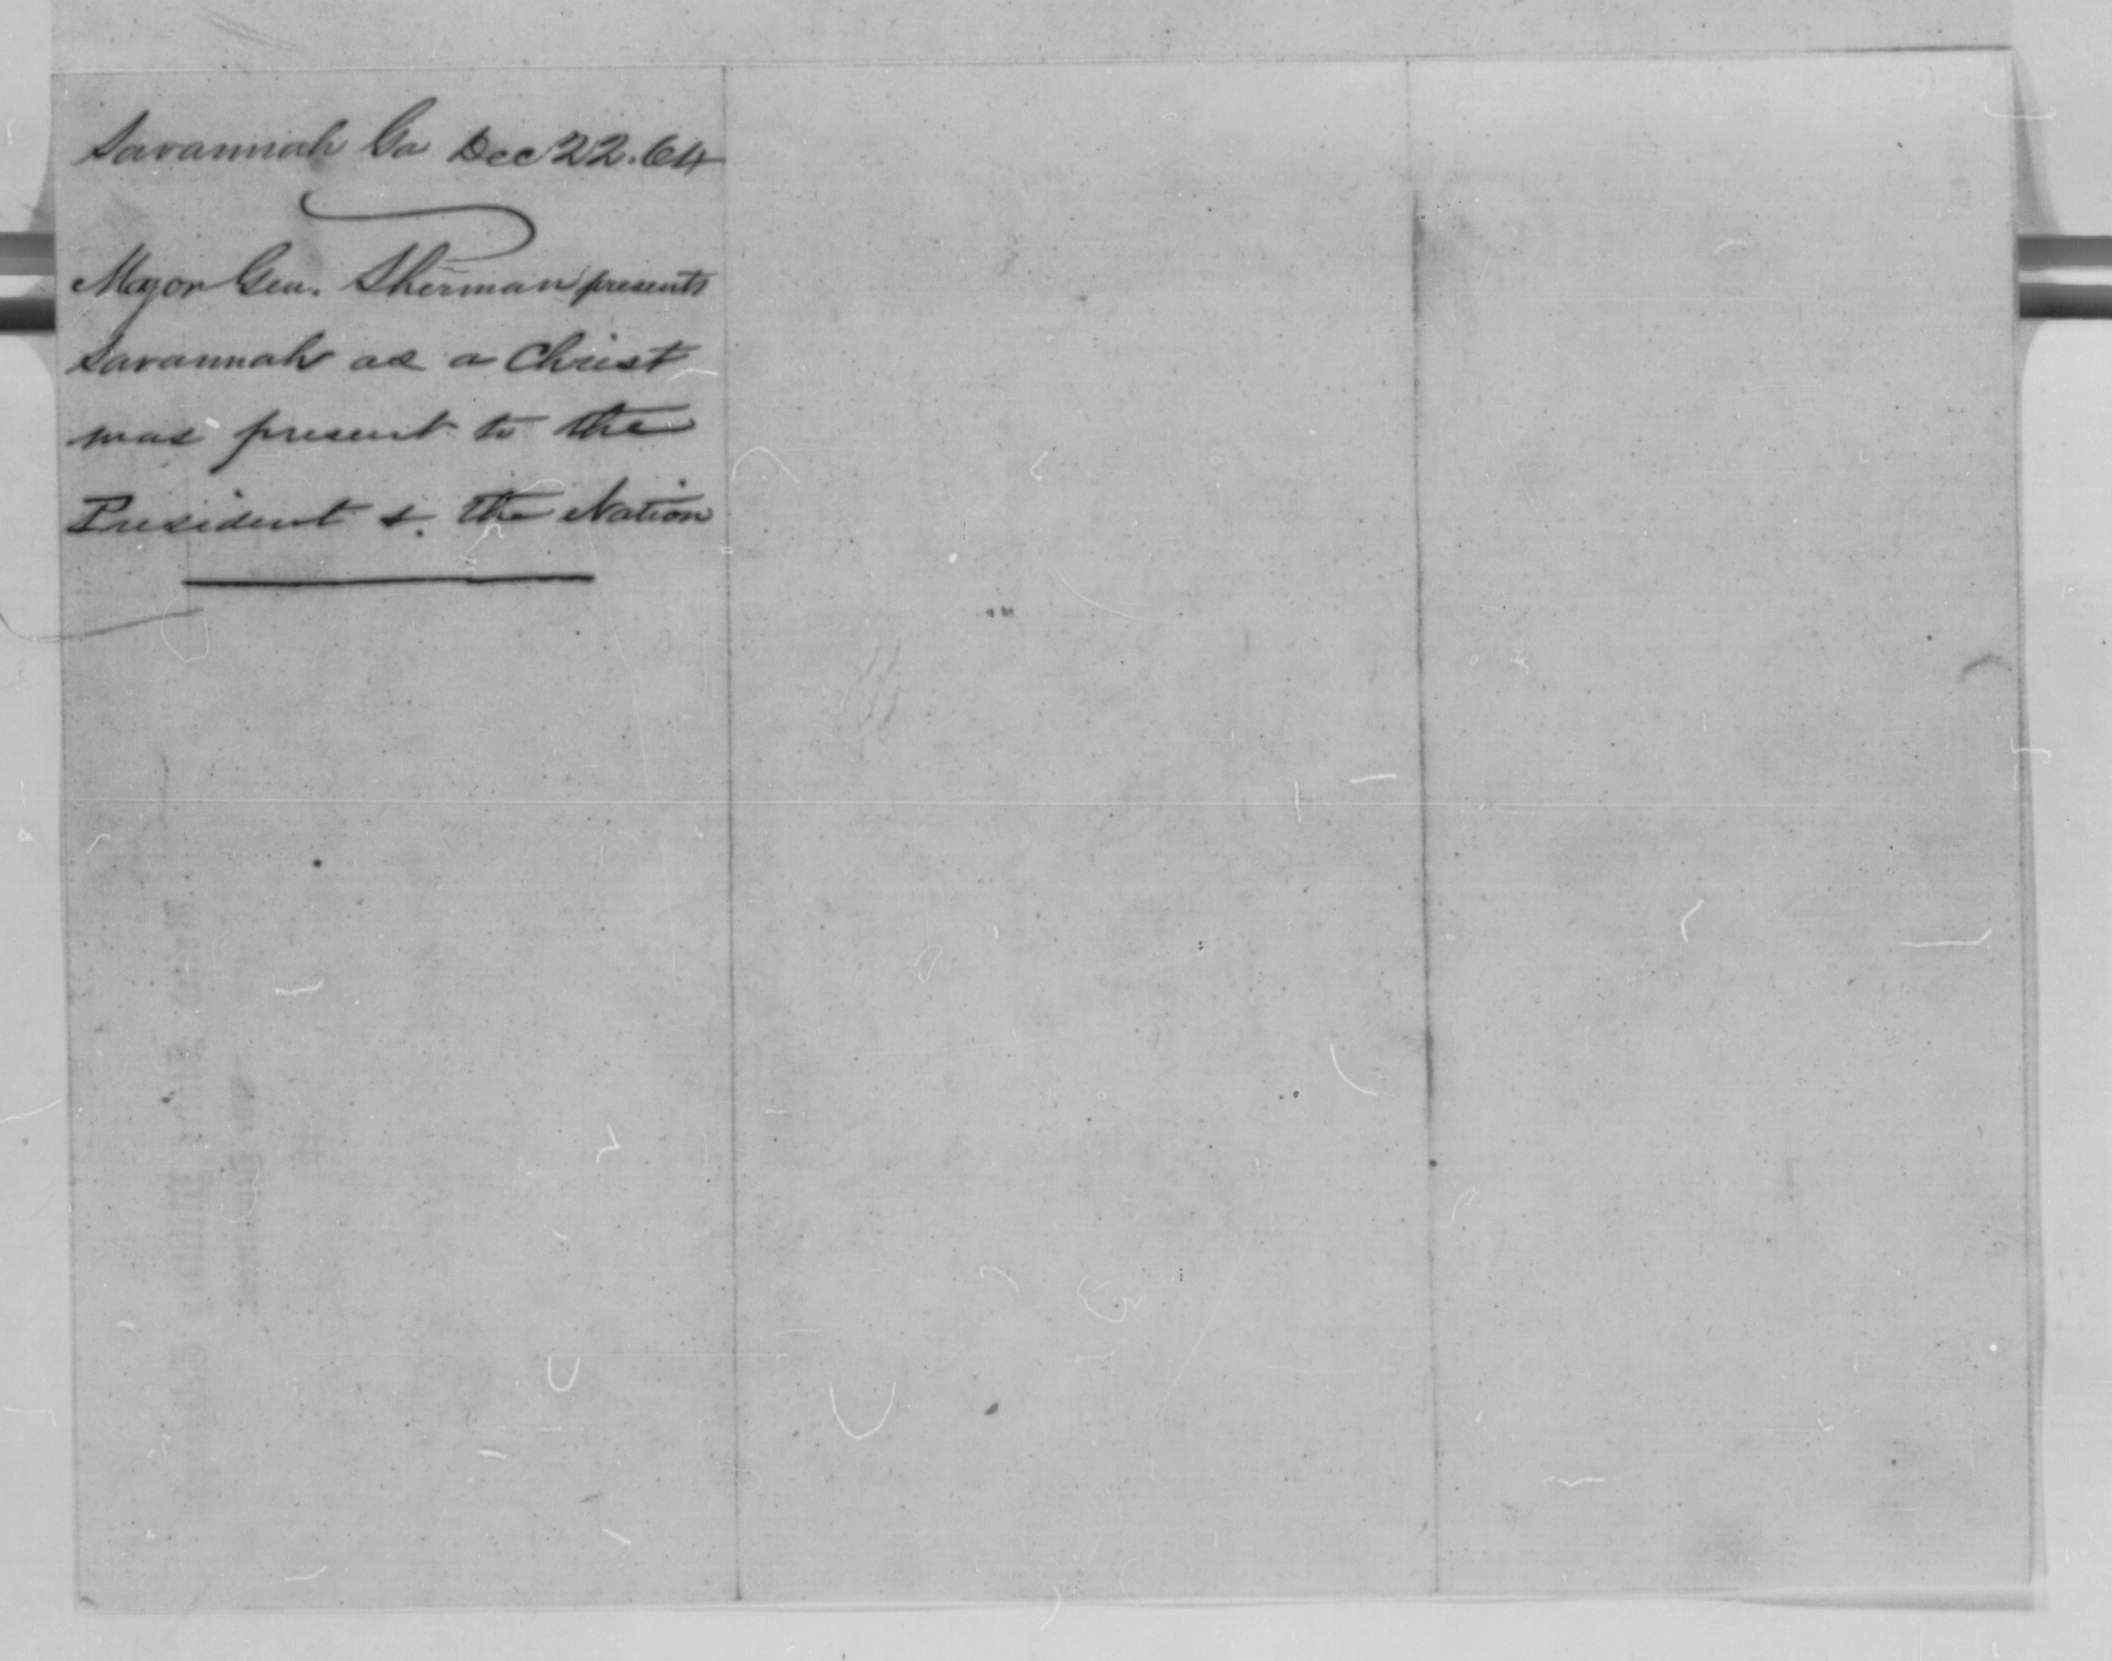 General William T. Sherman's December 22nd Letter to President Abraham Lincoln, Presenting Him a Christmas Gift